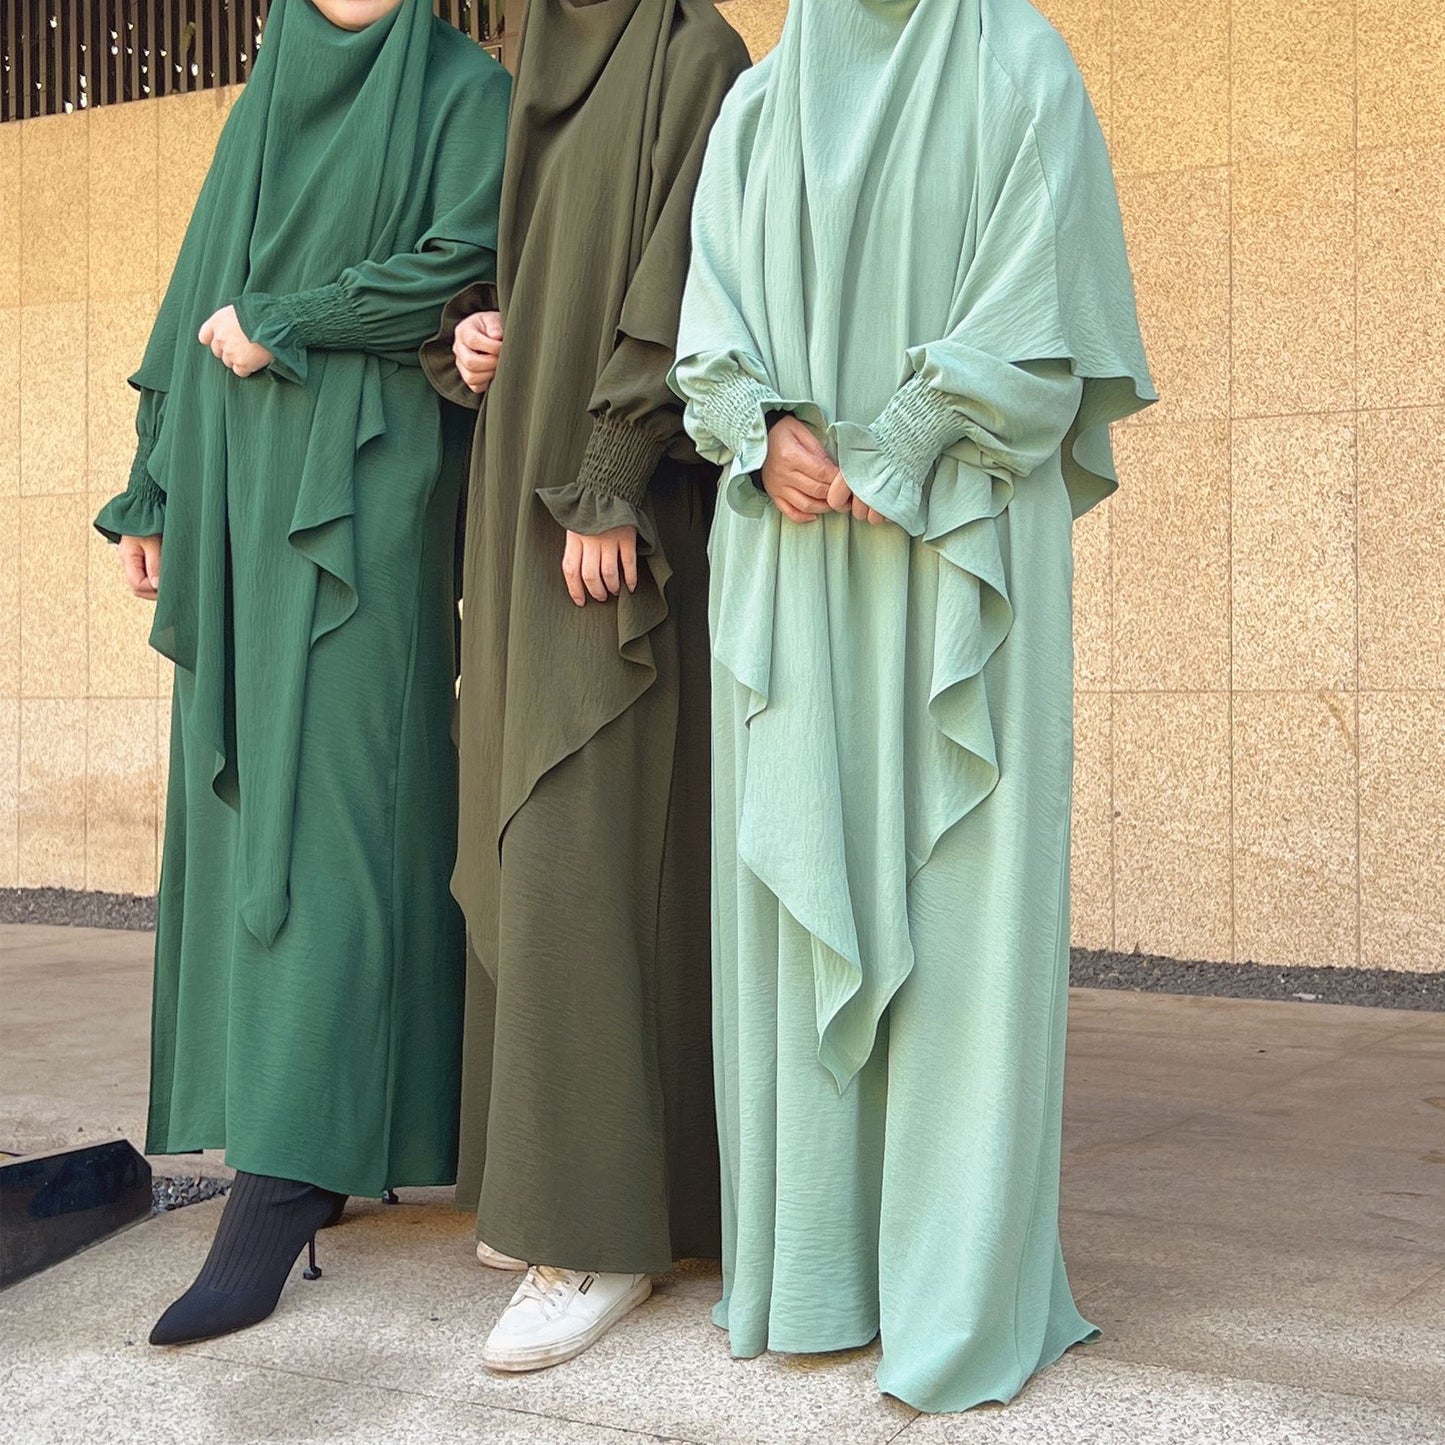 Shop Modest Clothing with our Dusty Green Crepe Crinkle Abaya with Double Layer Khimar Set – Exclusive Modesty at Hikmah Boutique. Immerse yourself in the serene charm of our Dusty Green Crepe Crinkle Abaya with Double Layer Khimar Set, a timeless modesty exclusively available at Hikmah Boutique.